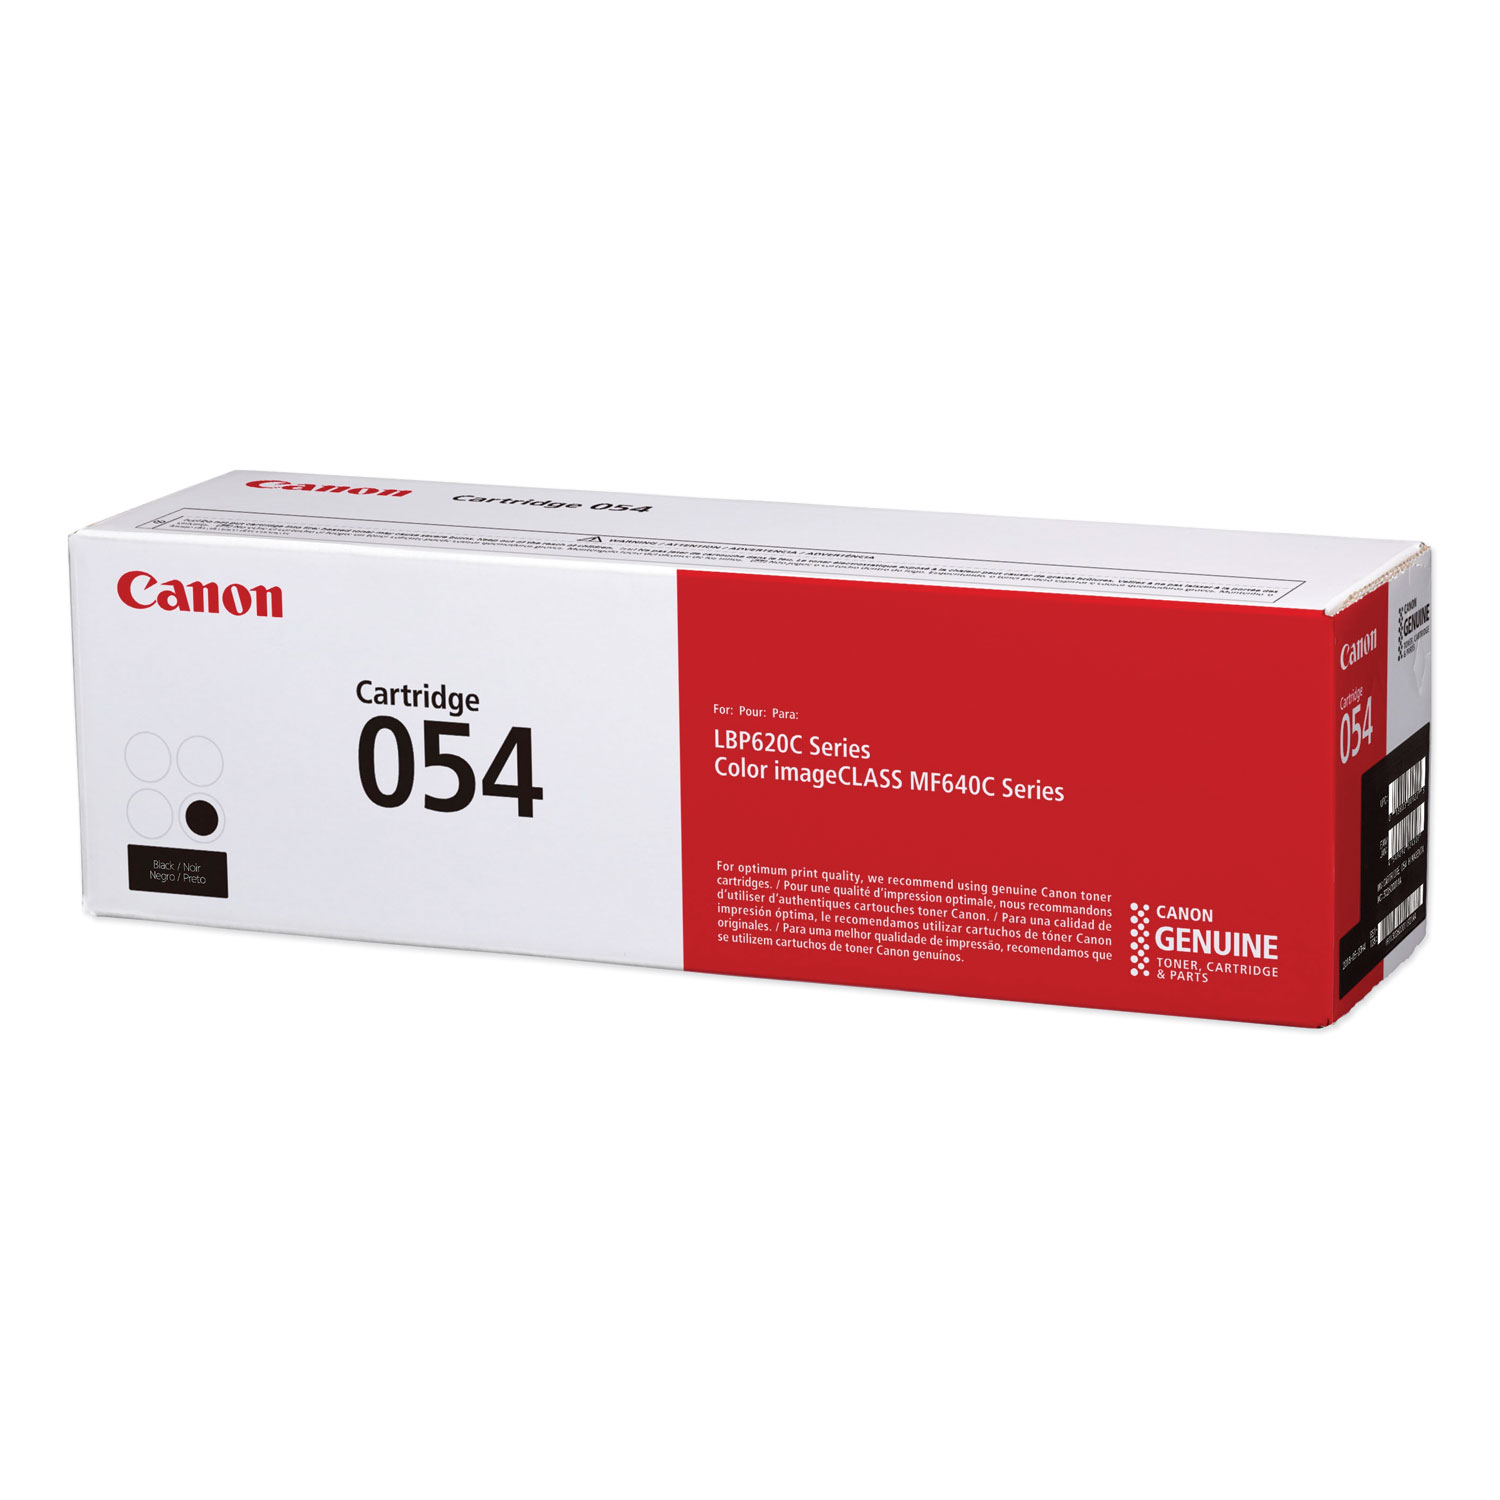  Canon 3028C001 3028C001 (054H) High-Yield Toner, 3,100 Page-Yield, Black (CNM3028C001) 